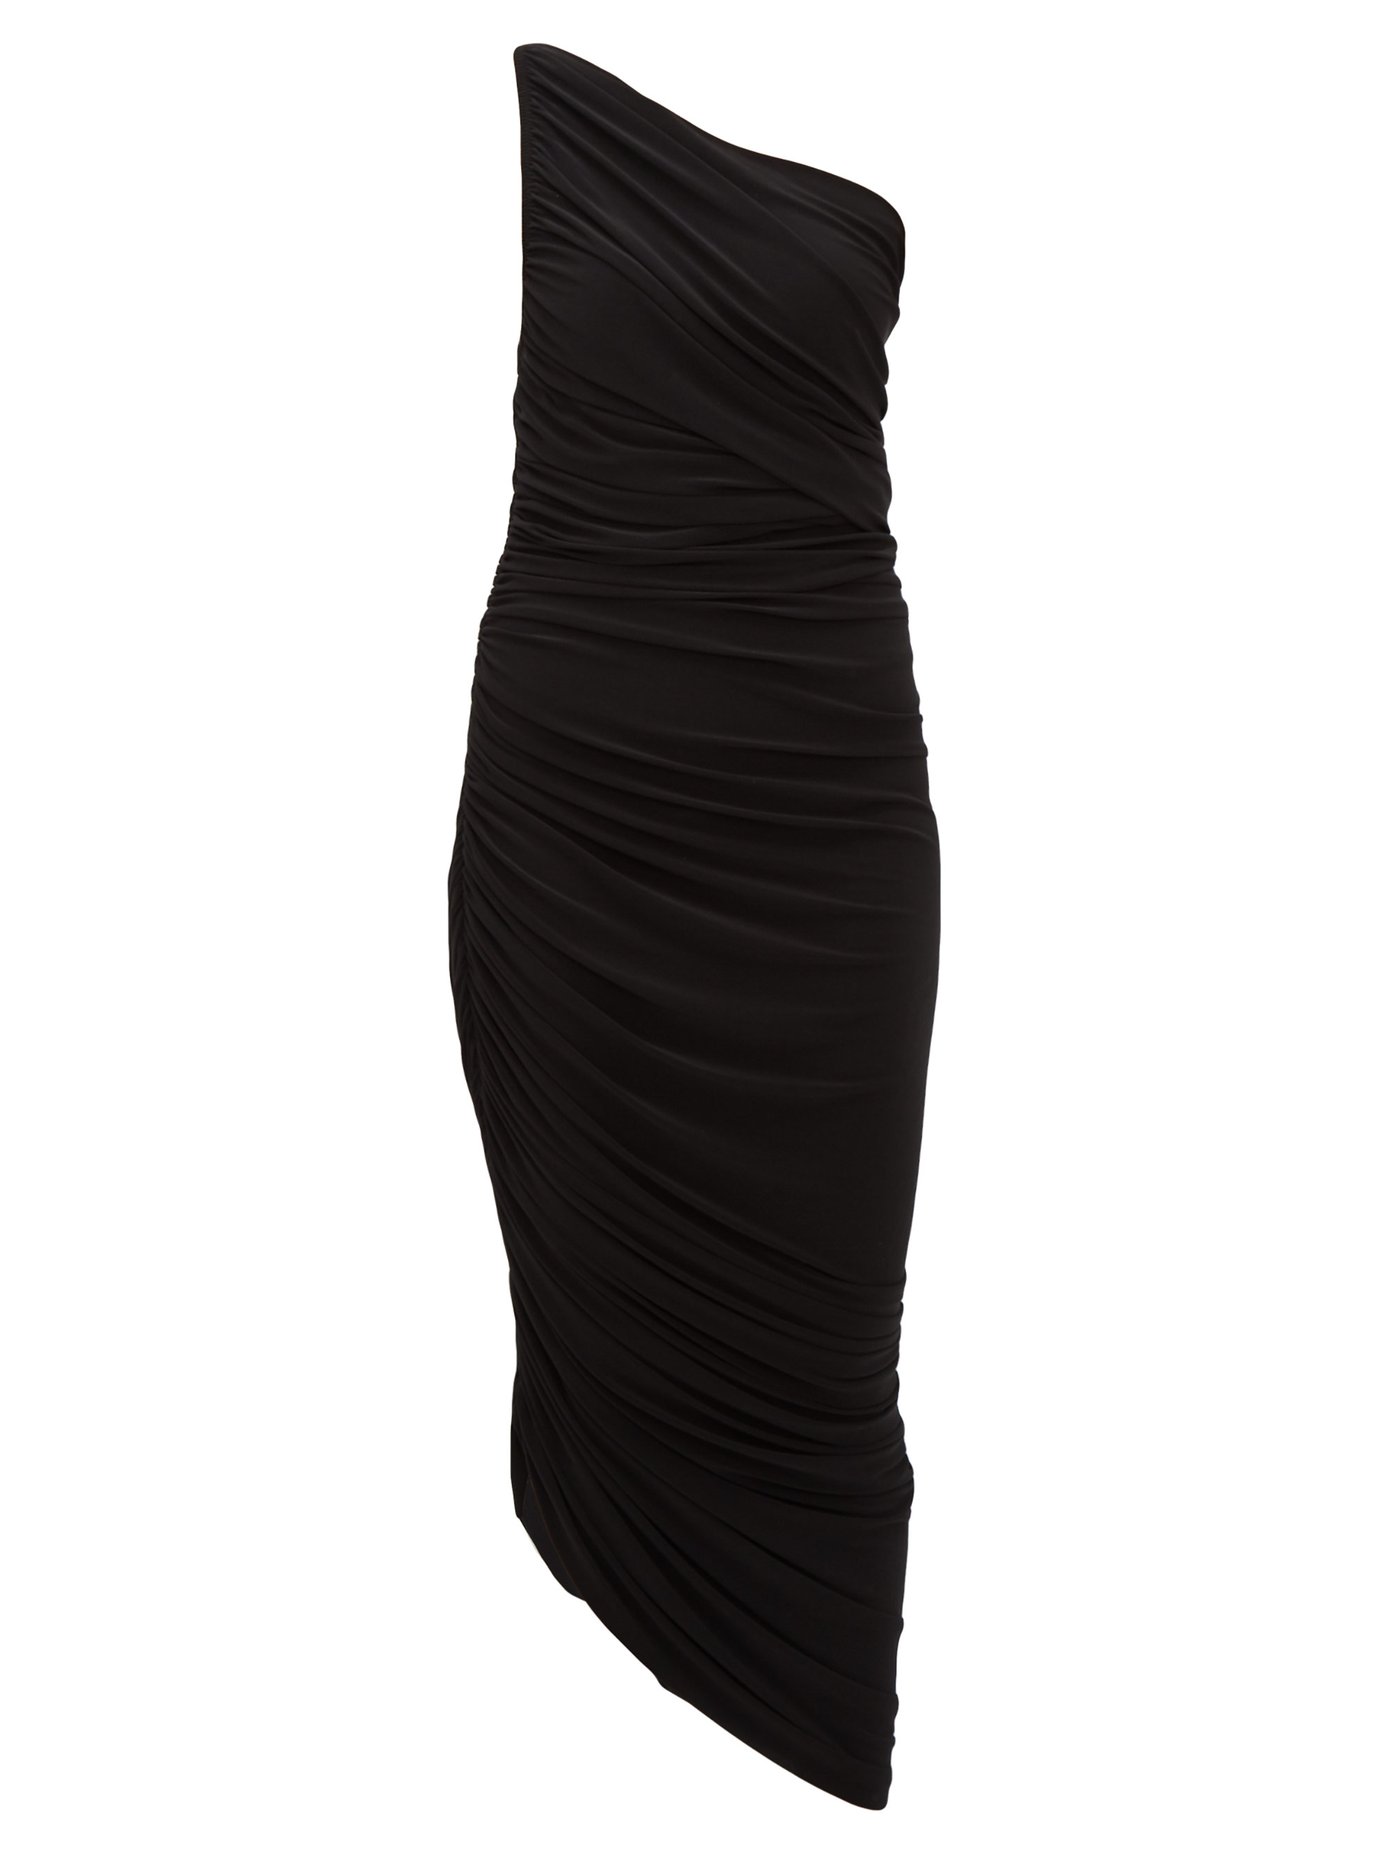 Buy > norma kamali ruched dress > in stock